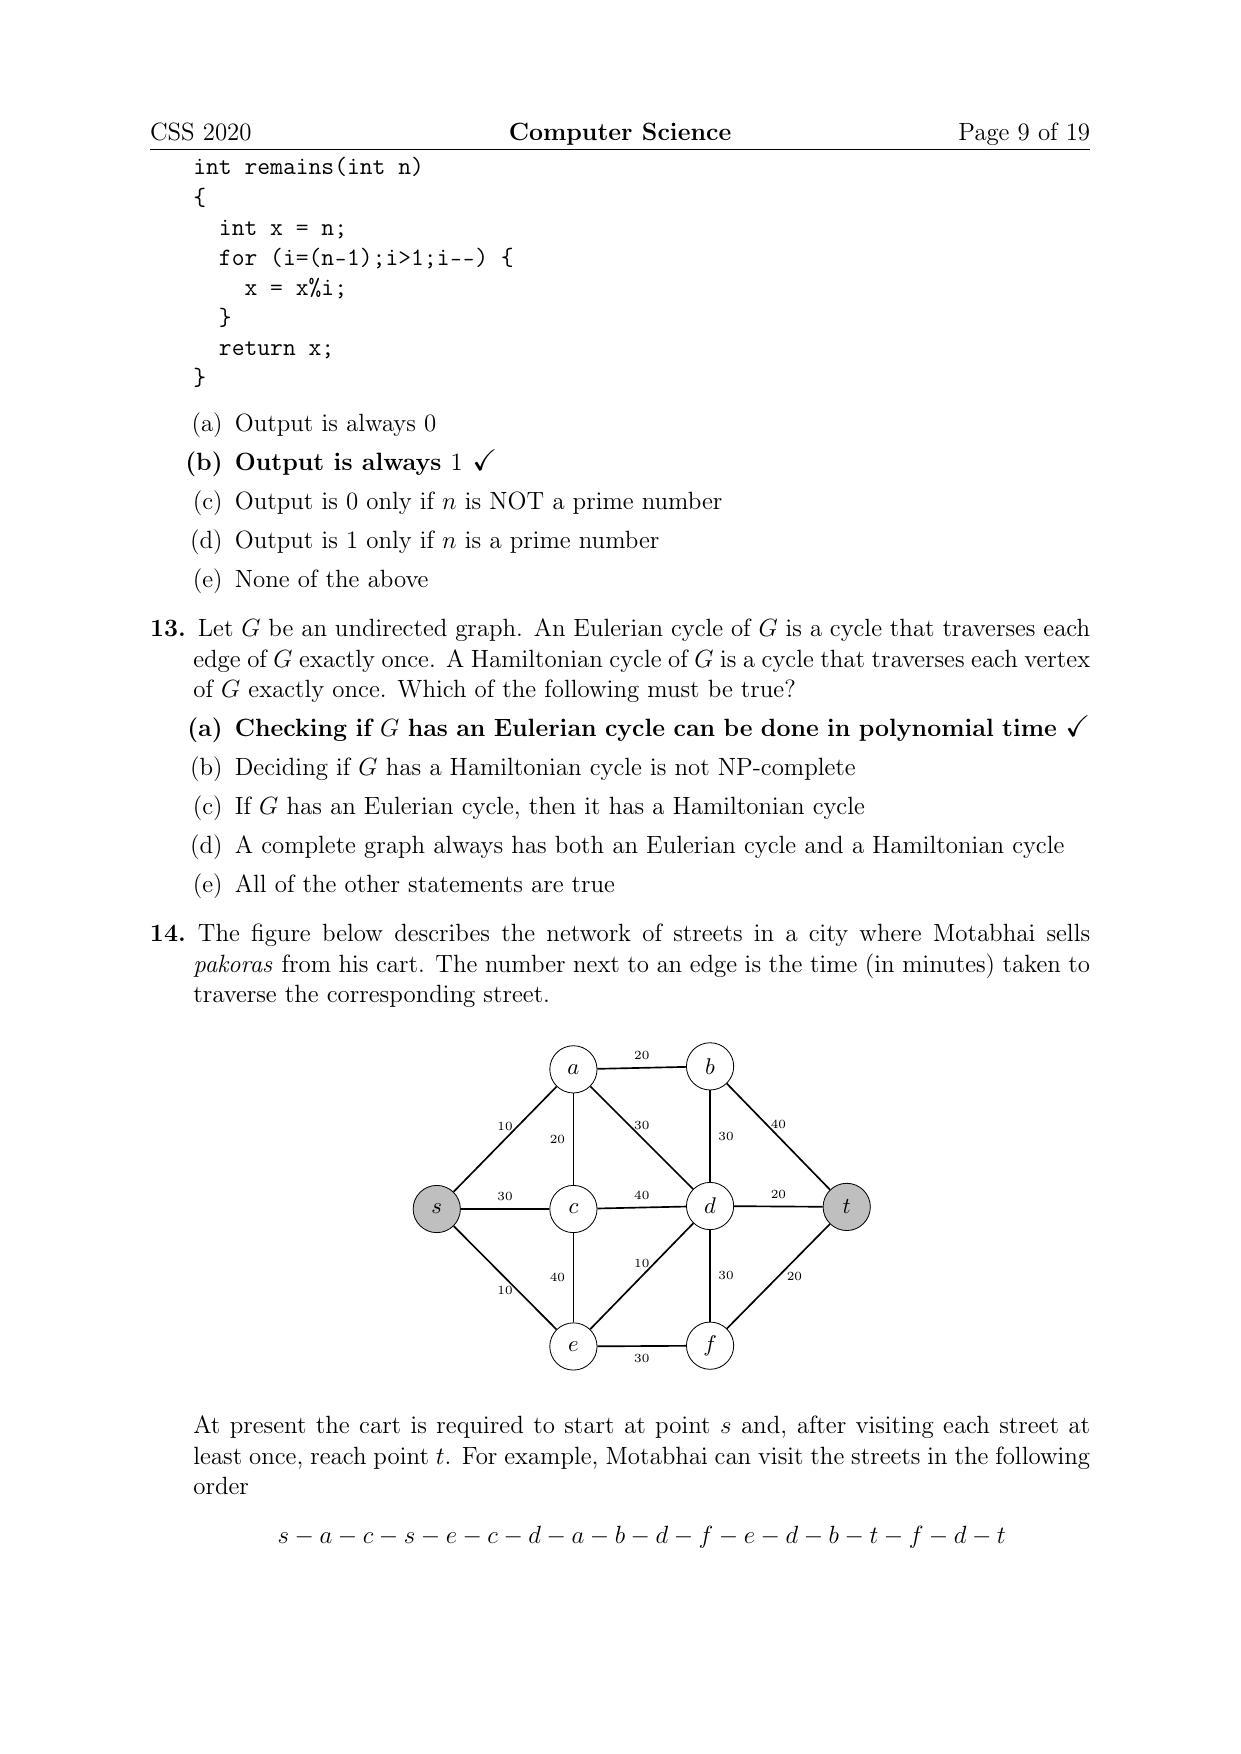 TIFR GS 2020 Computer & Systems Sciences Question Paper - Page 9